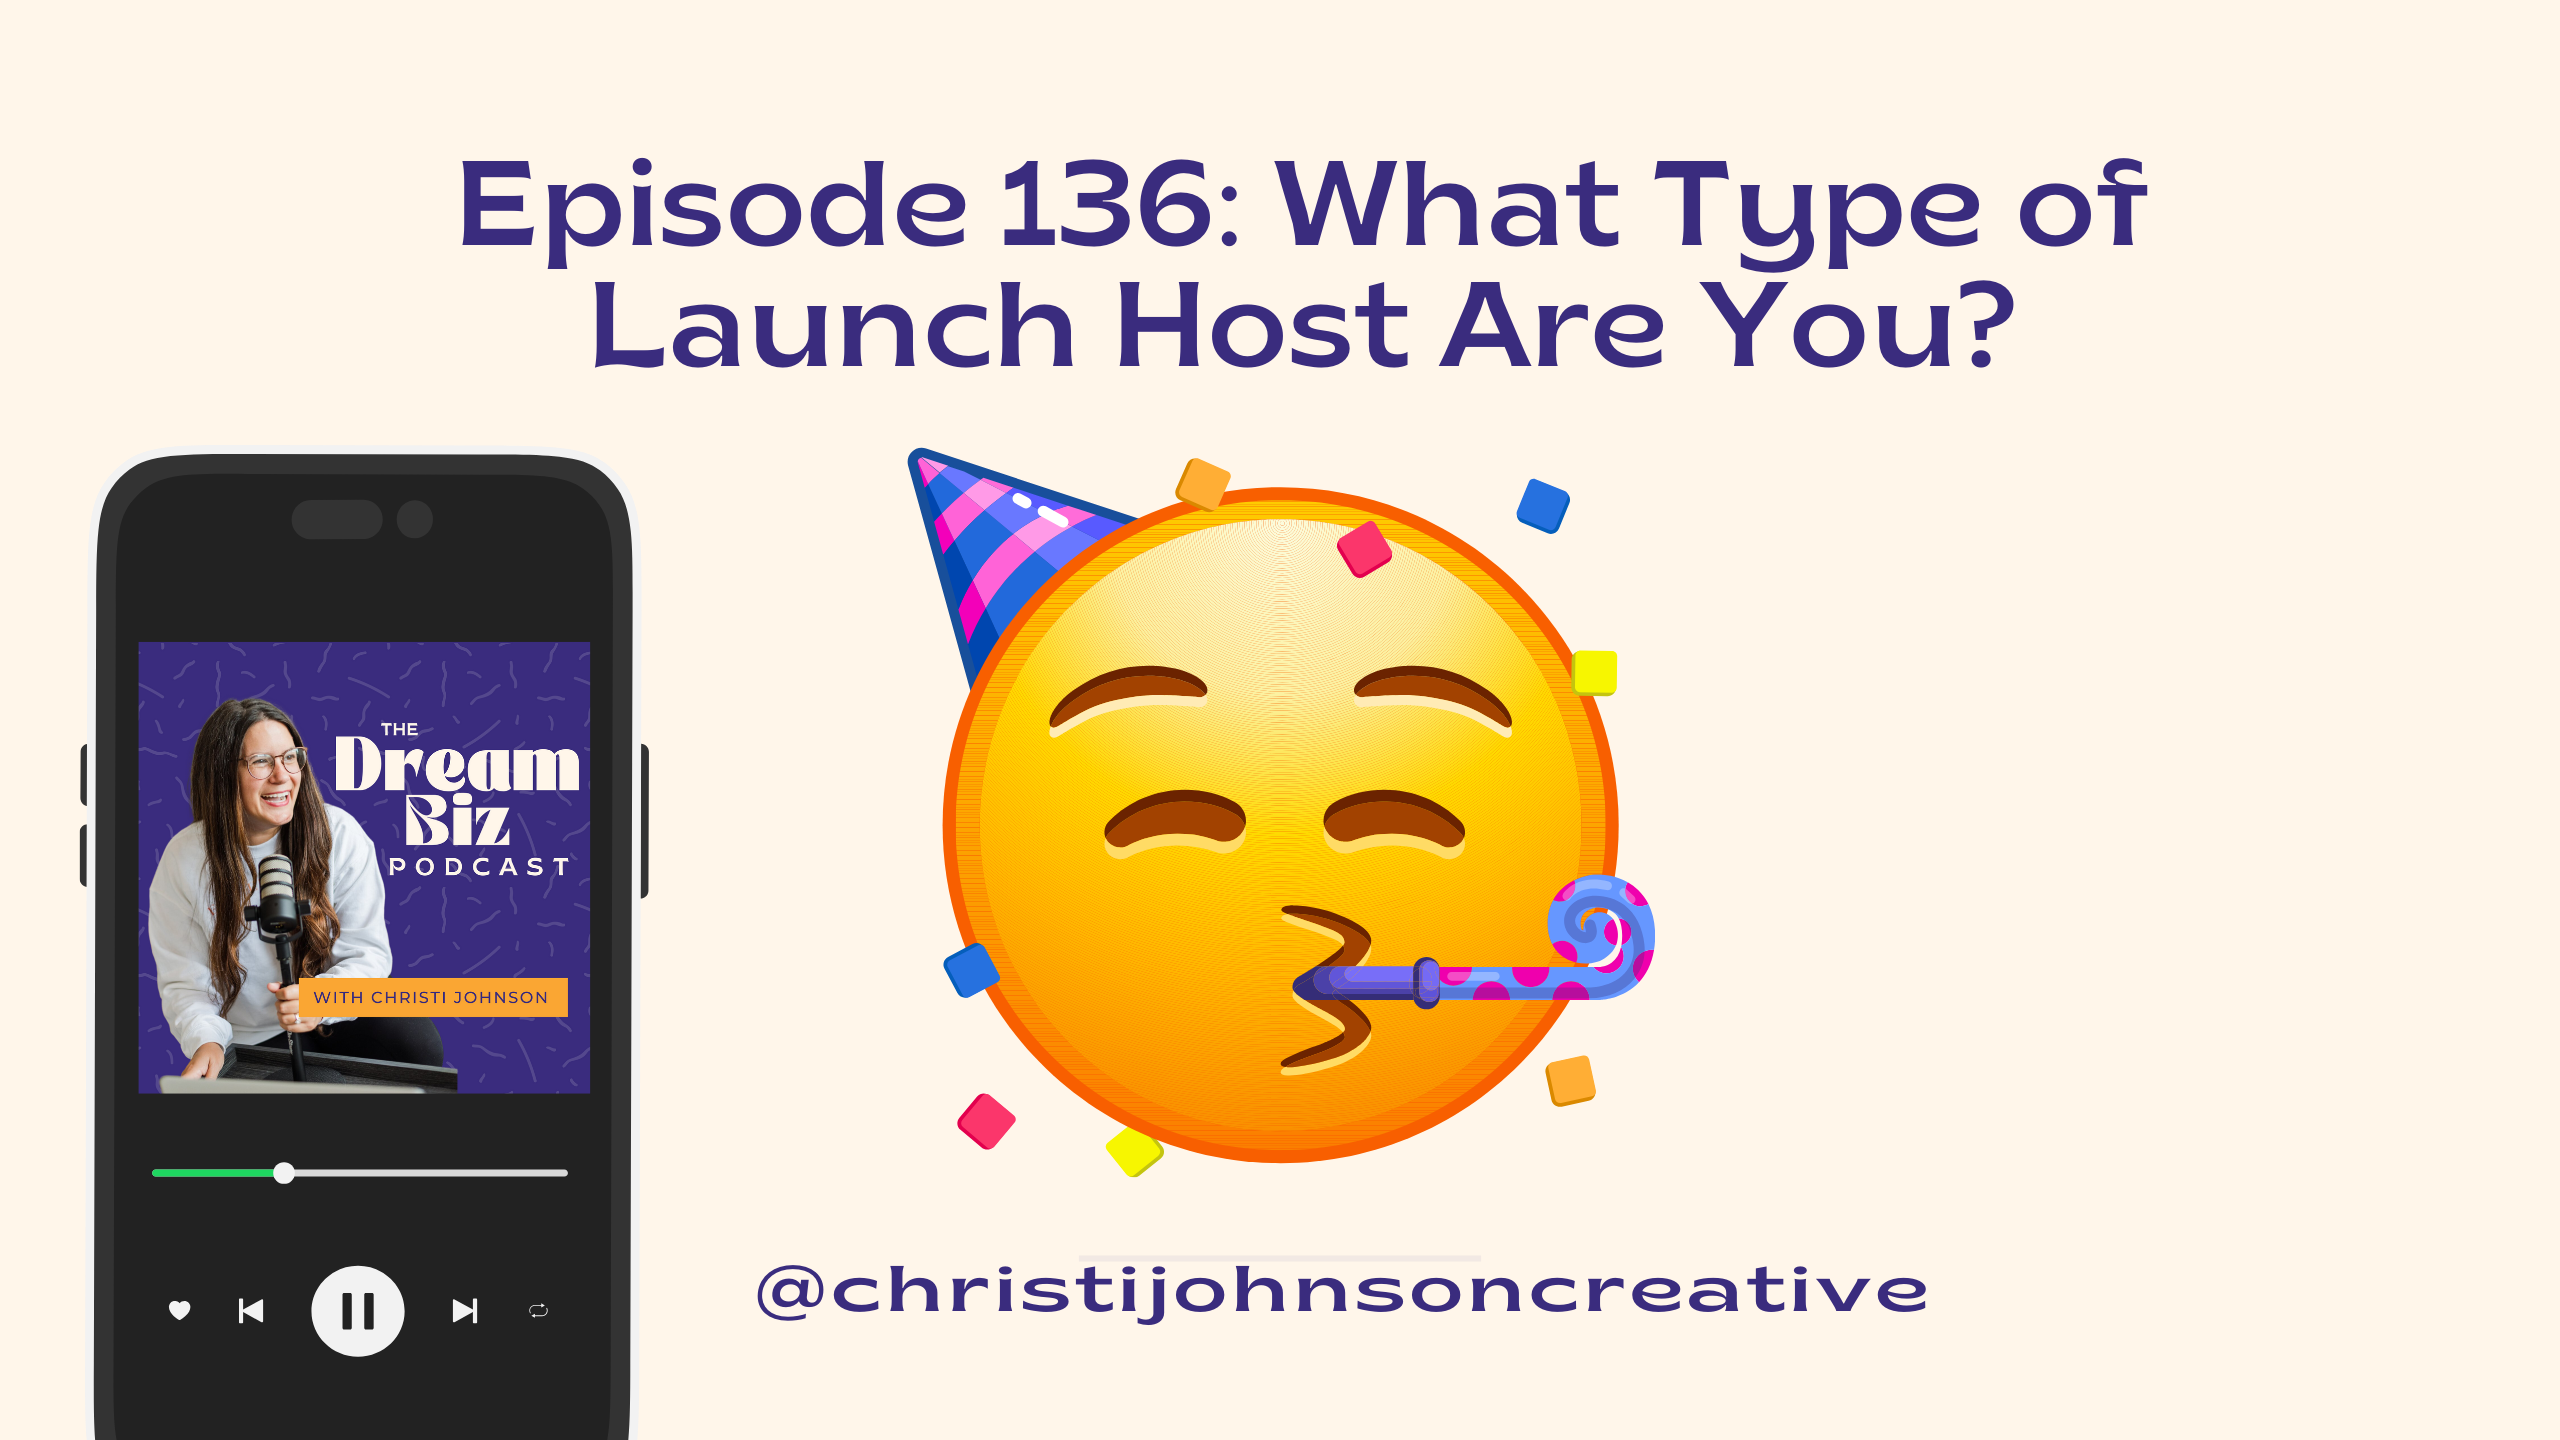 ID: Episode 136: What Type of Launch Host Are You?